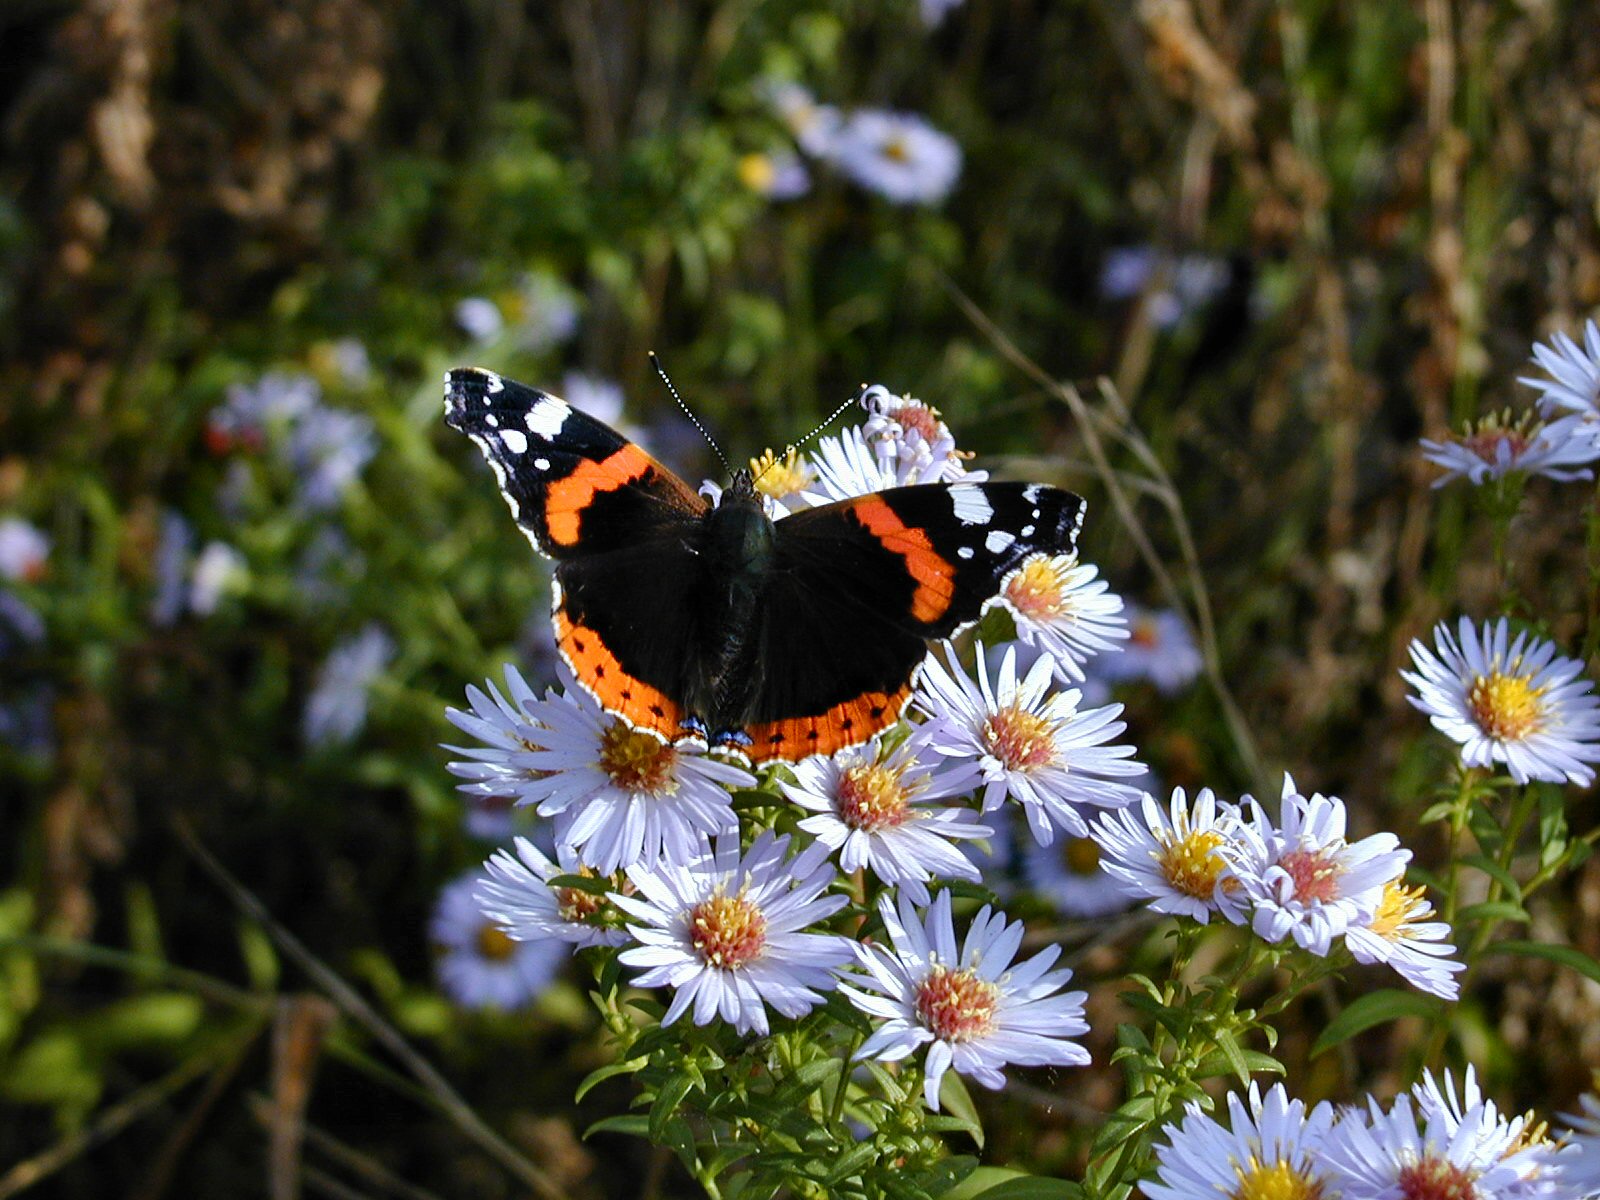 File:Red Admiral butterfly by Flycatcher.jpg - Wikimedia Commons